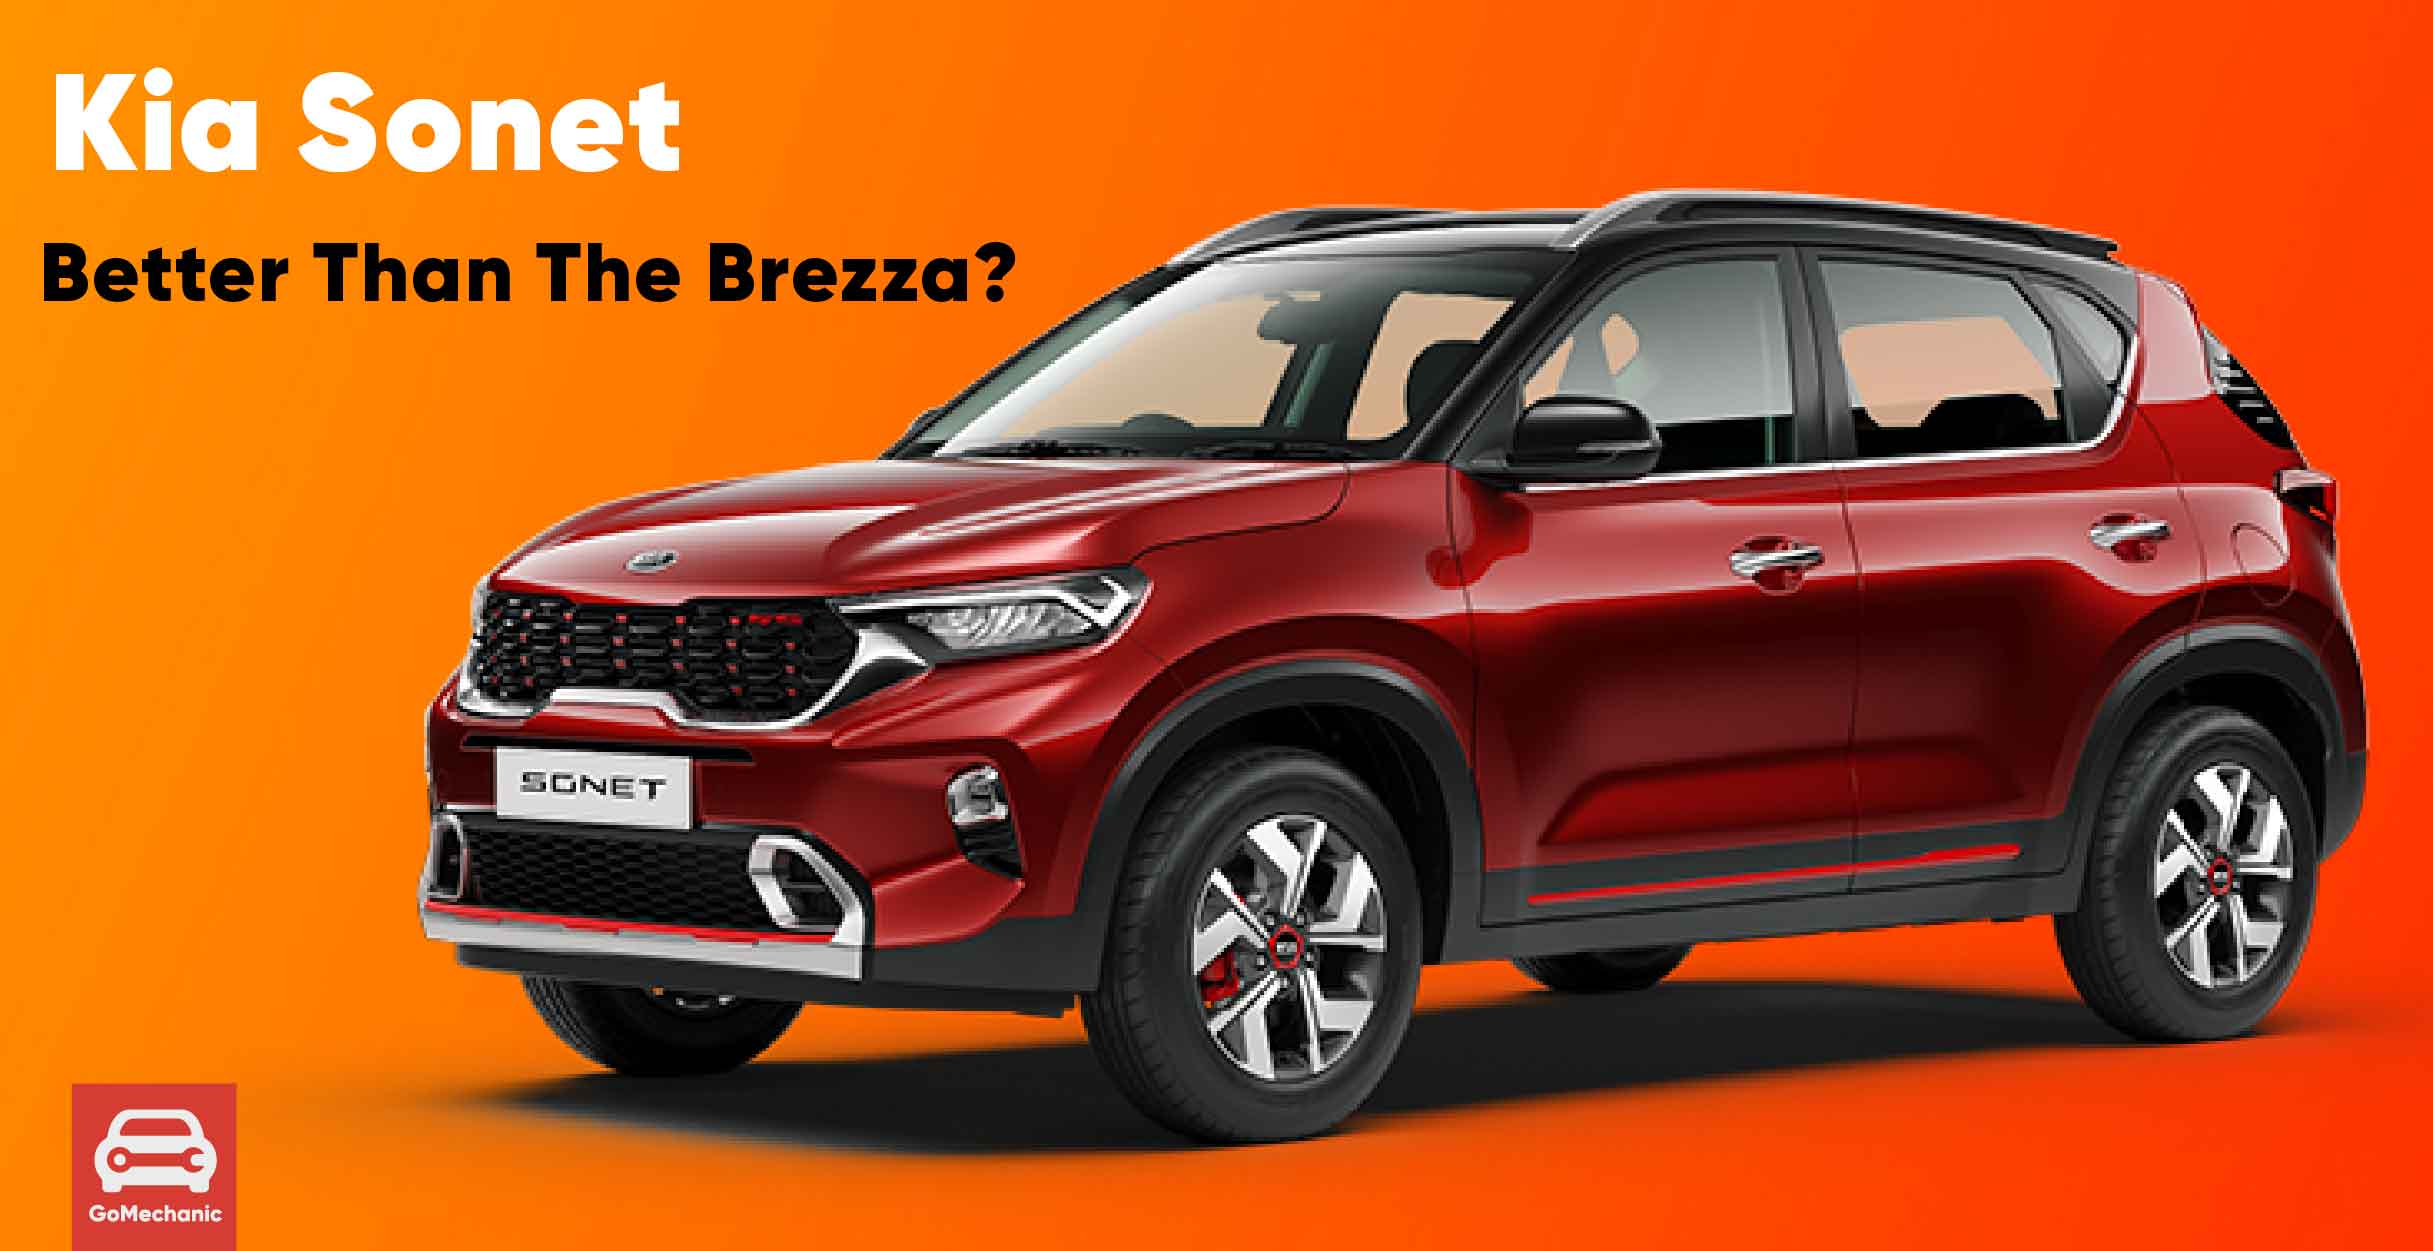 10 Reasons Why The Kia Sonet is Better than the Brezza